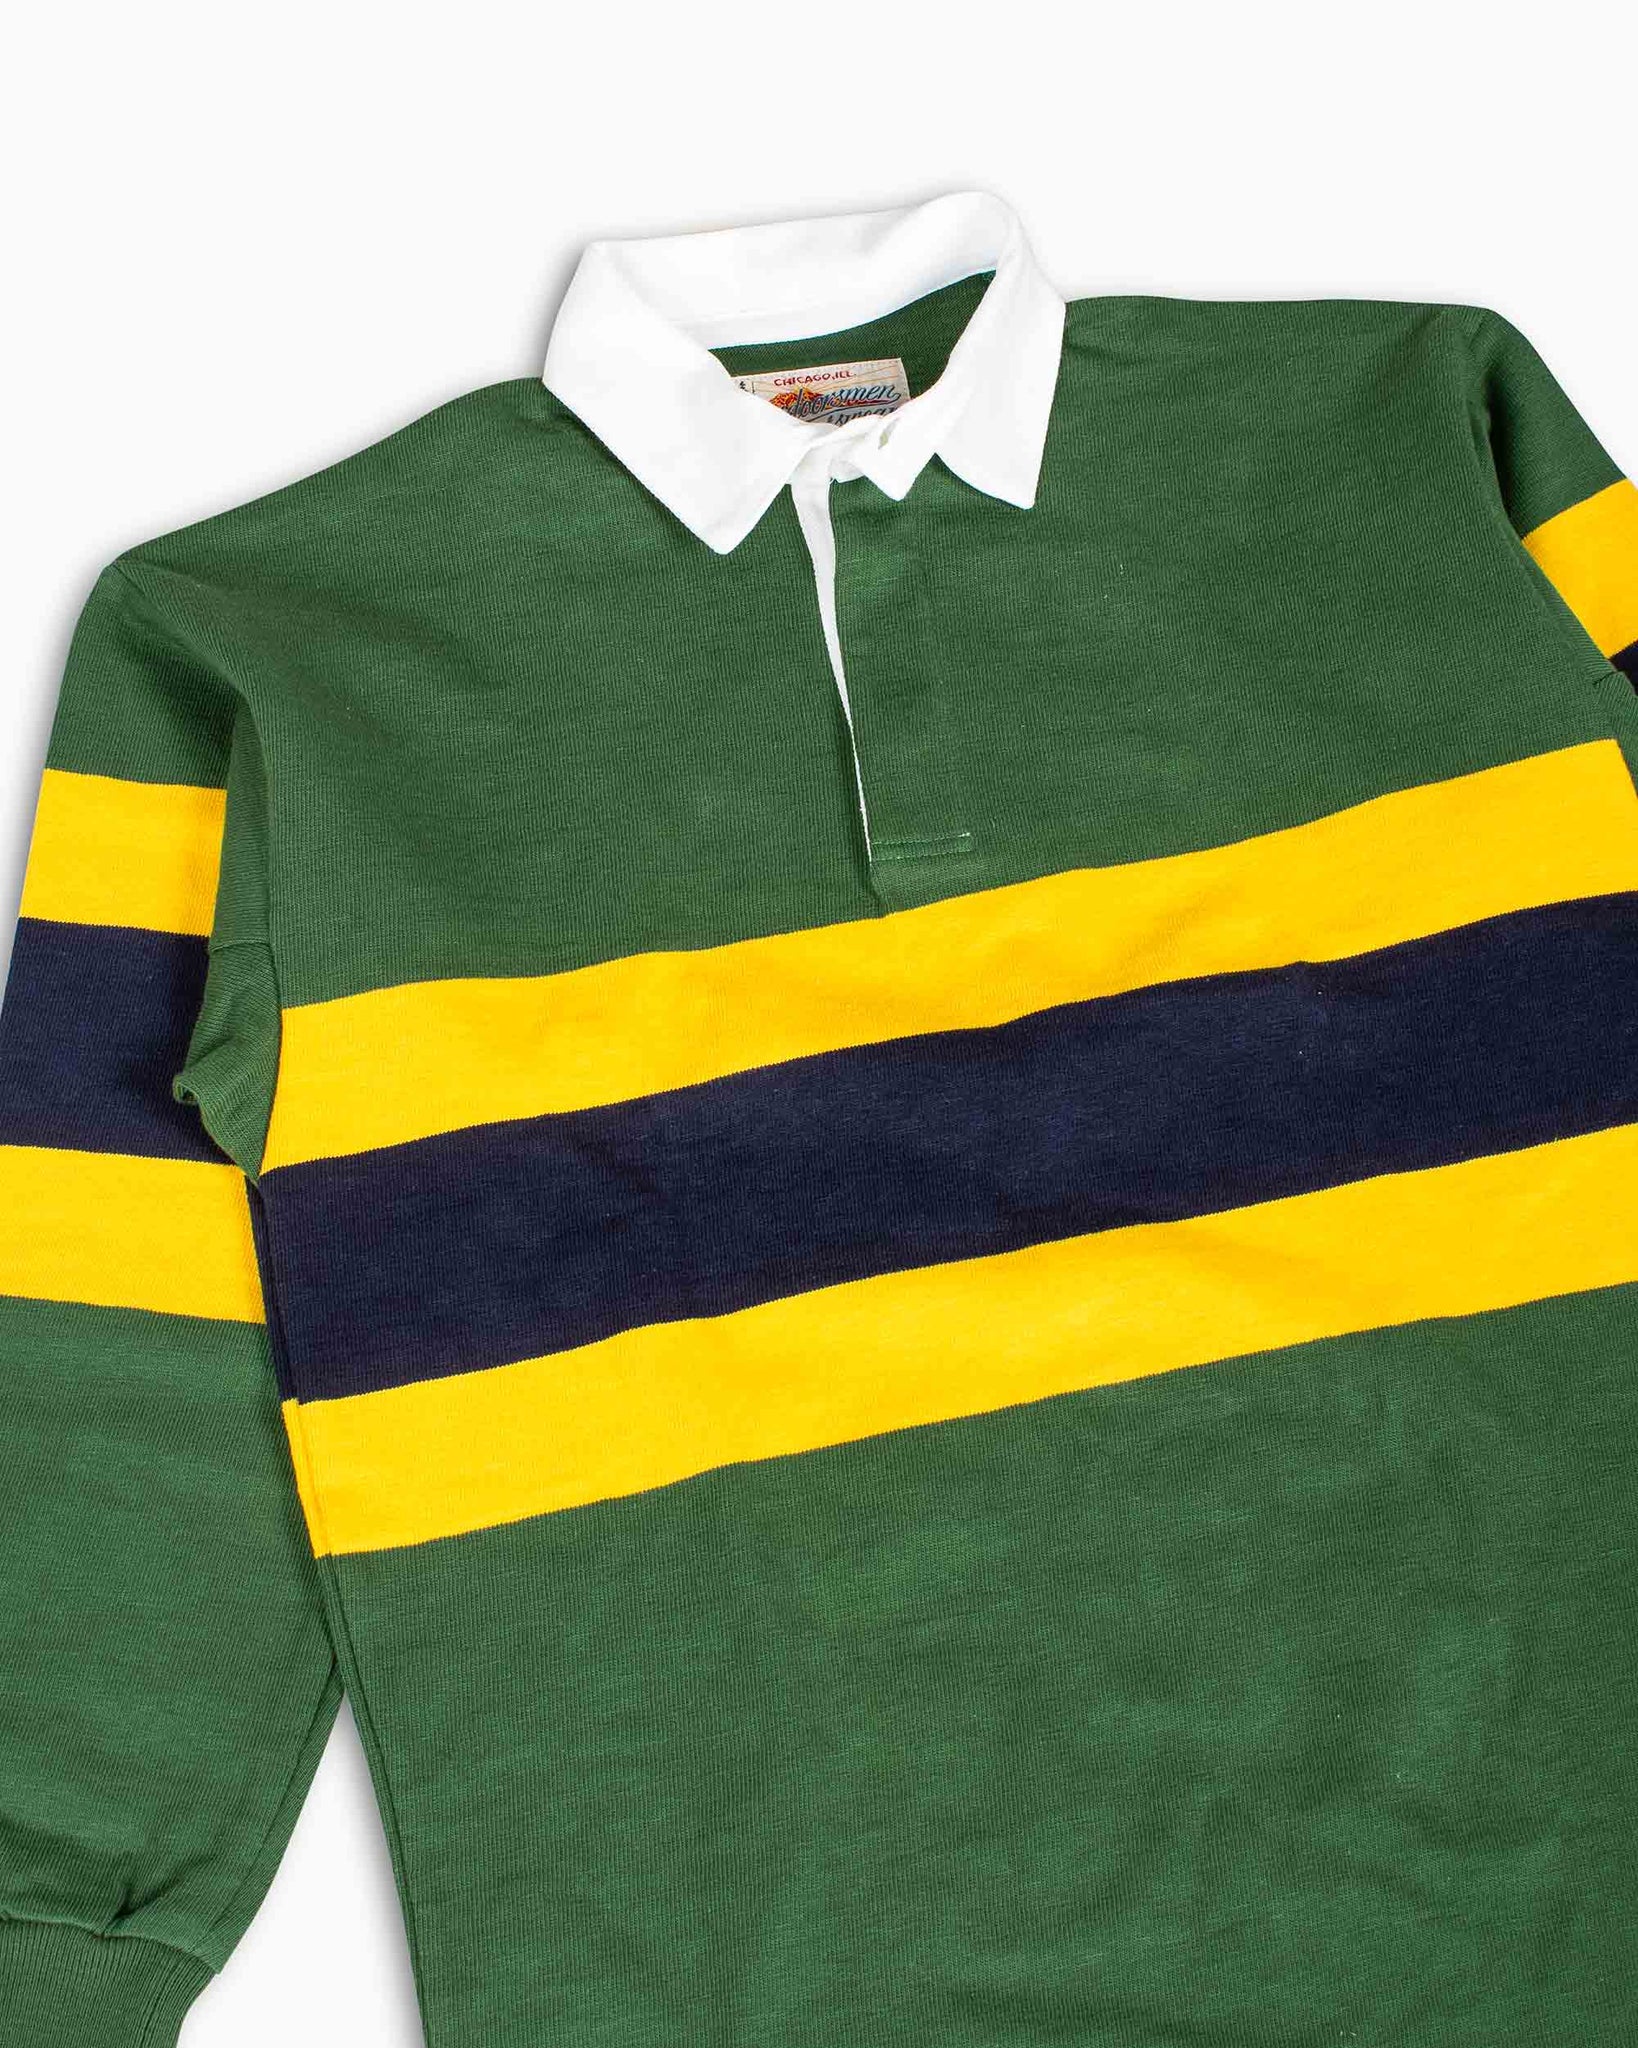 The Real McCoy's MC21021 Climbers' Striped Rugby Shirt Green Details